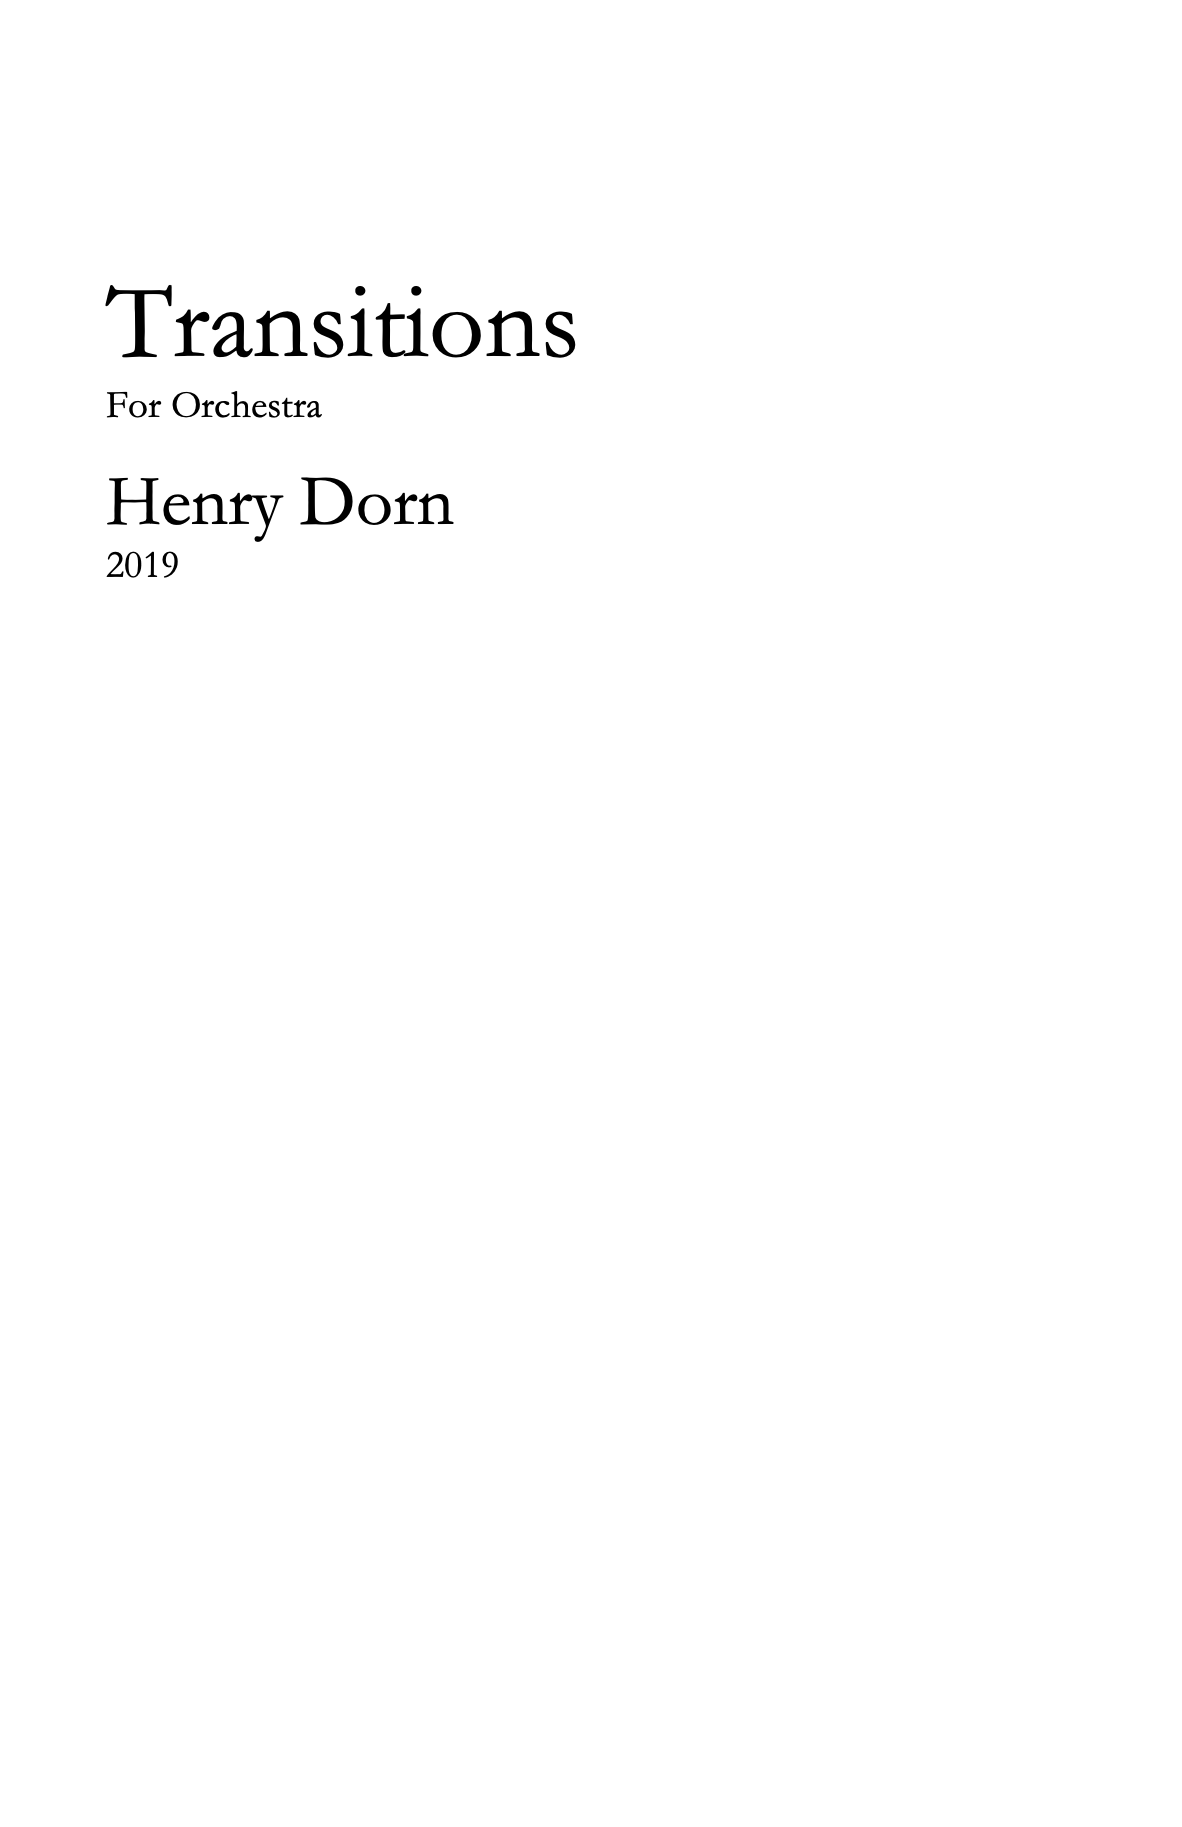 Transitions For Orchestra by Henry Dorn